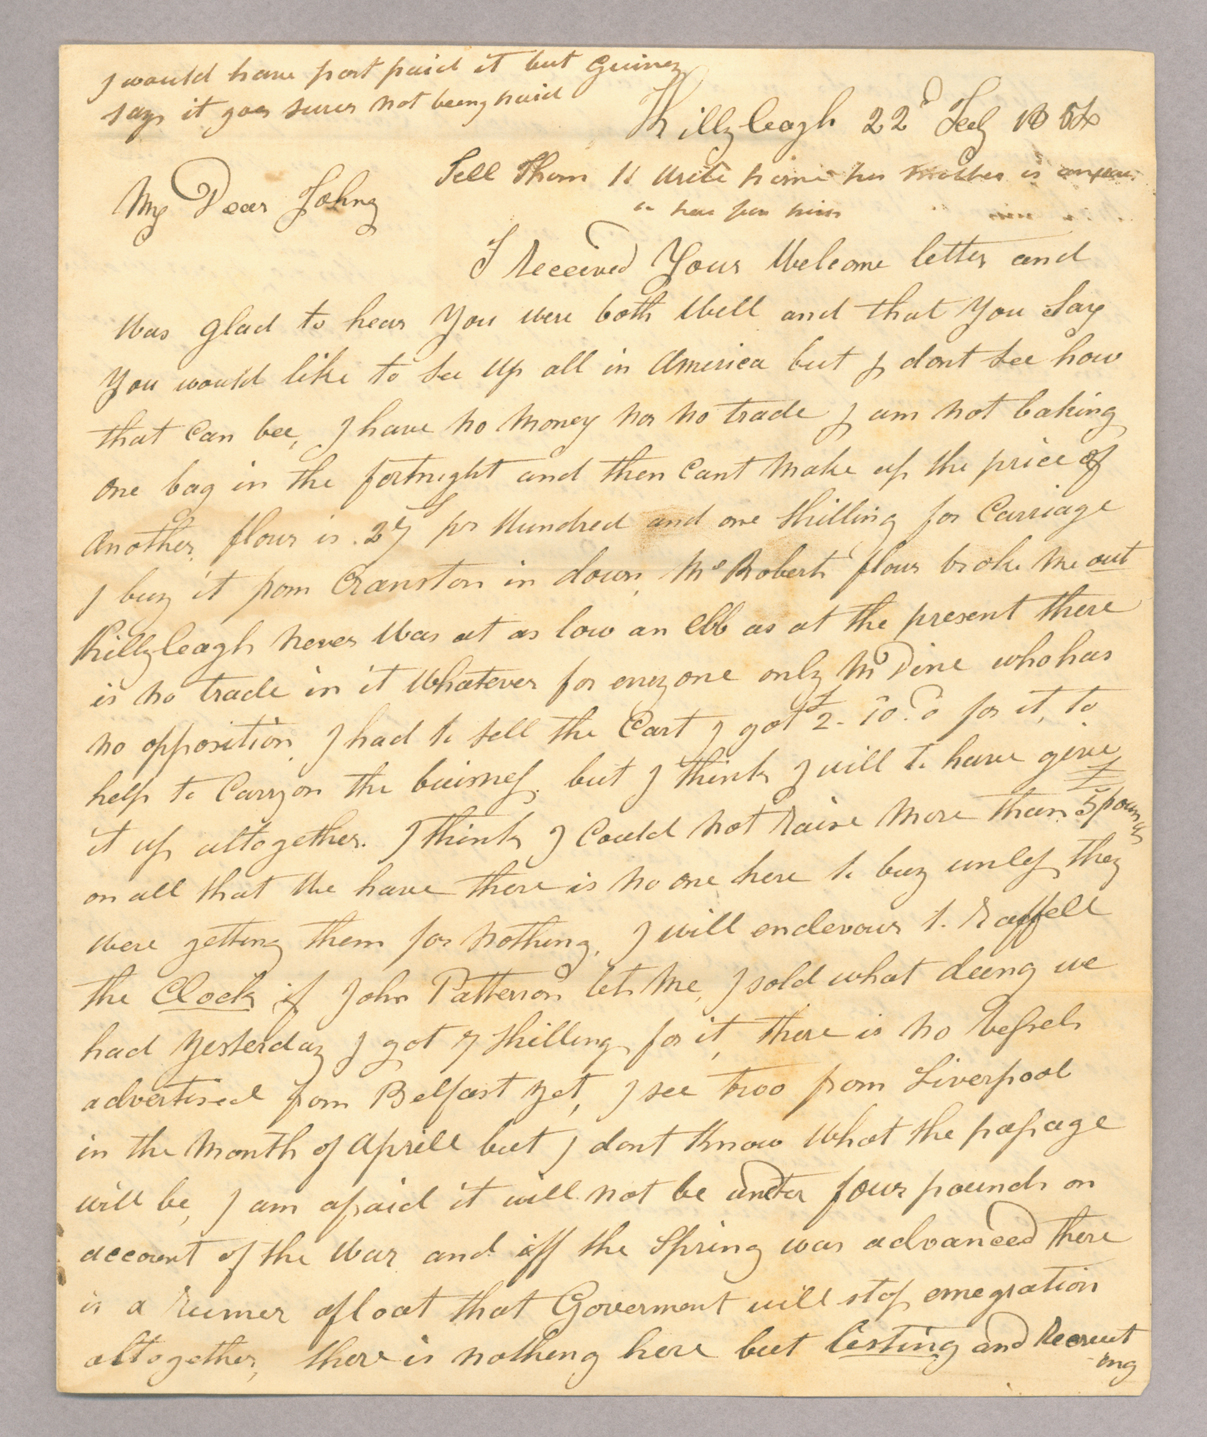 Letter. R[obert] B[rownlee], Killyleagh, Ireland, to "My Dear Johny" [John E. Brownlee], n. p., Page 1